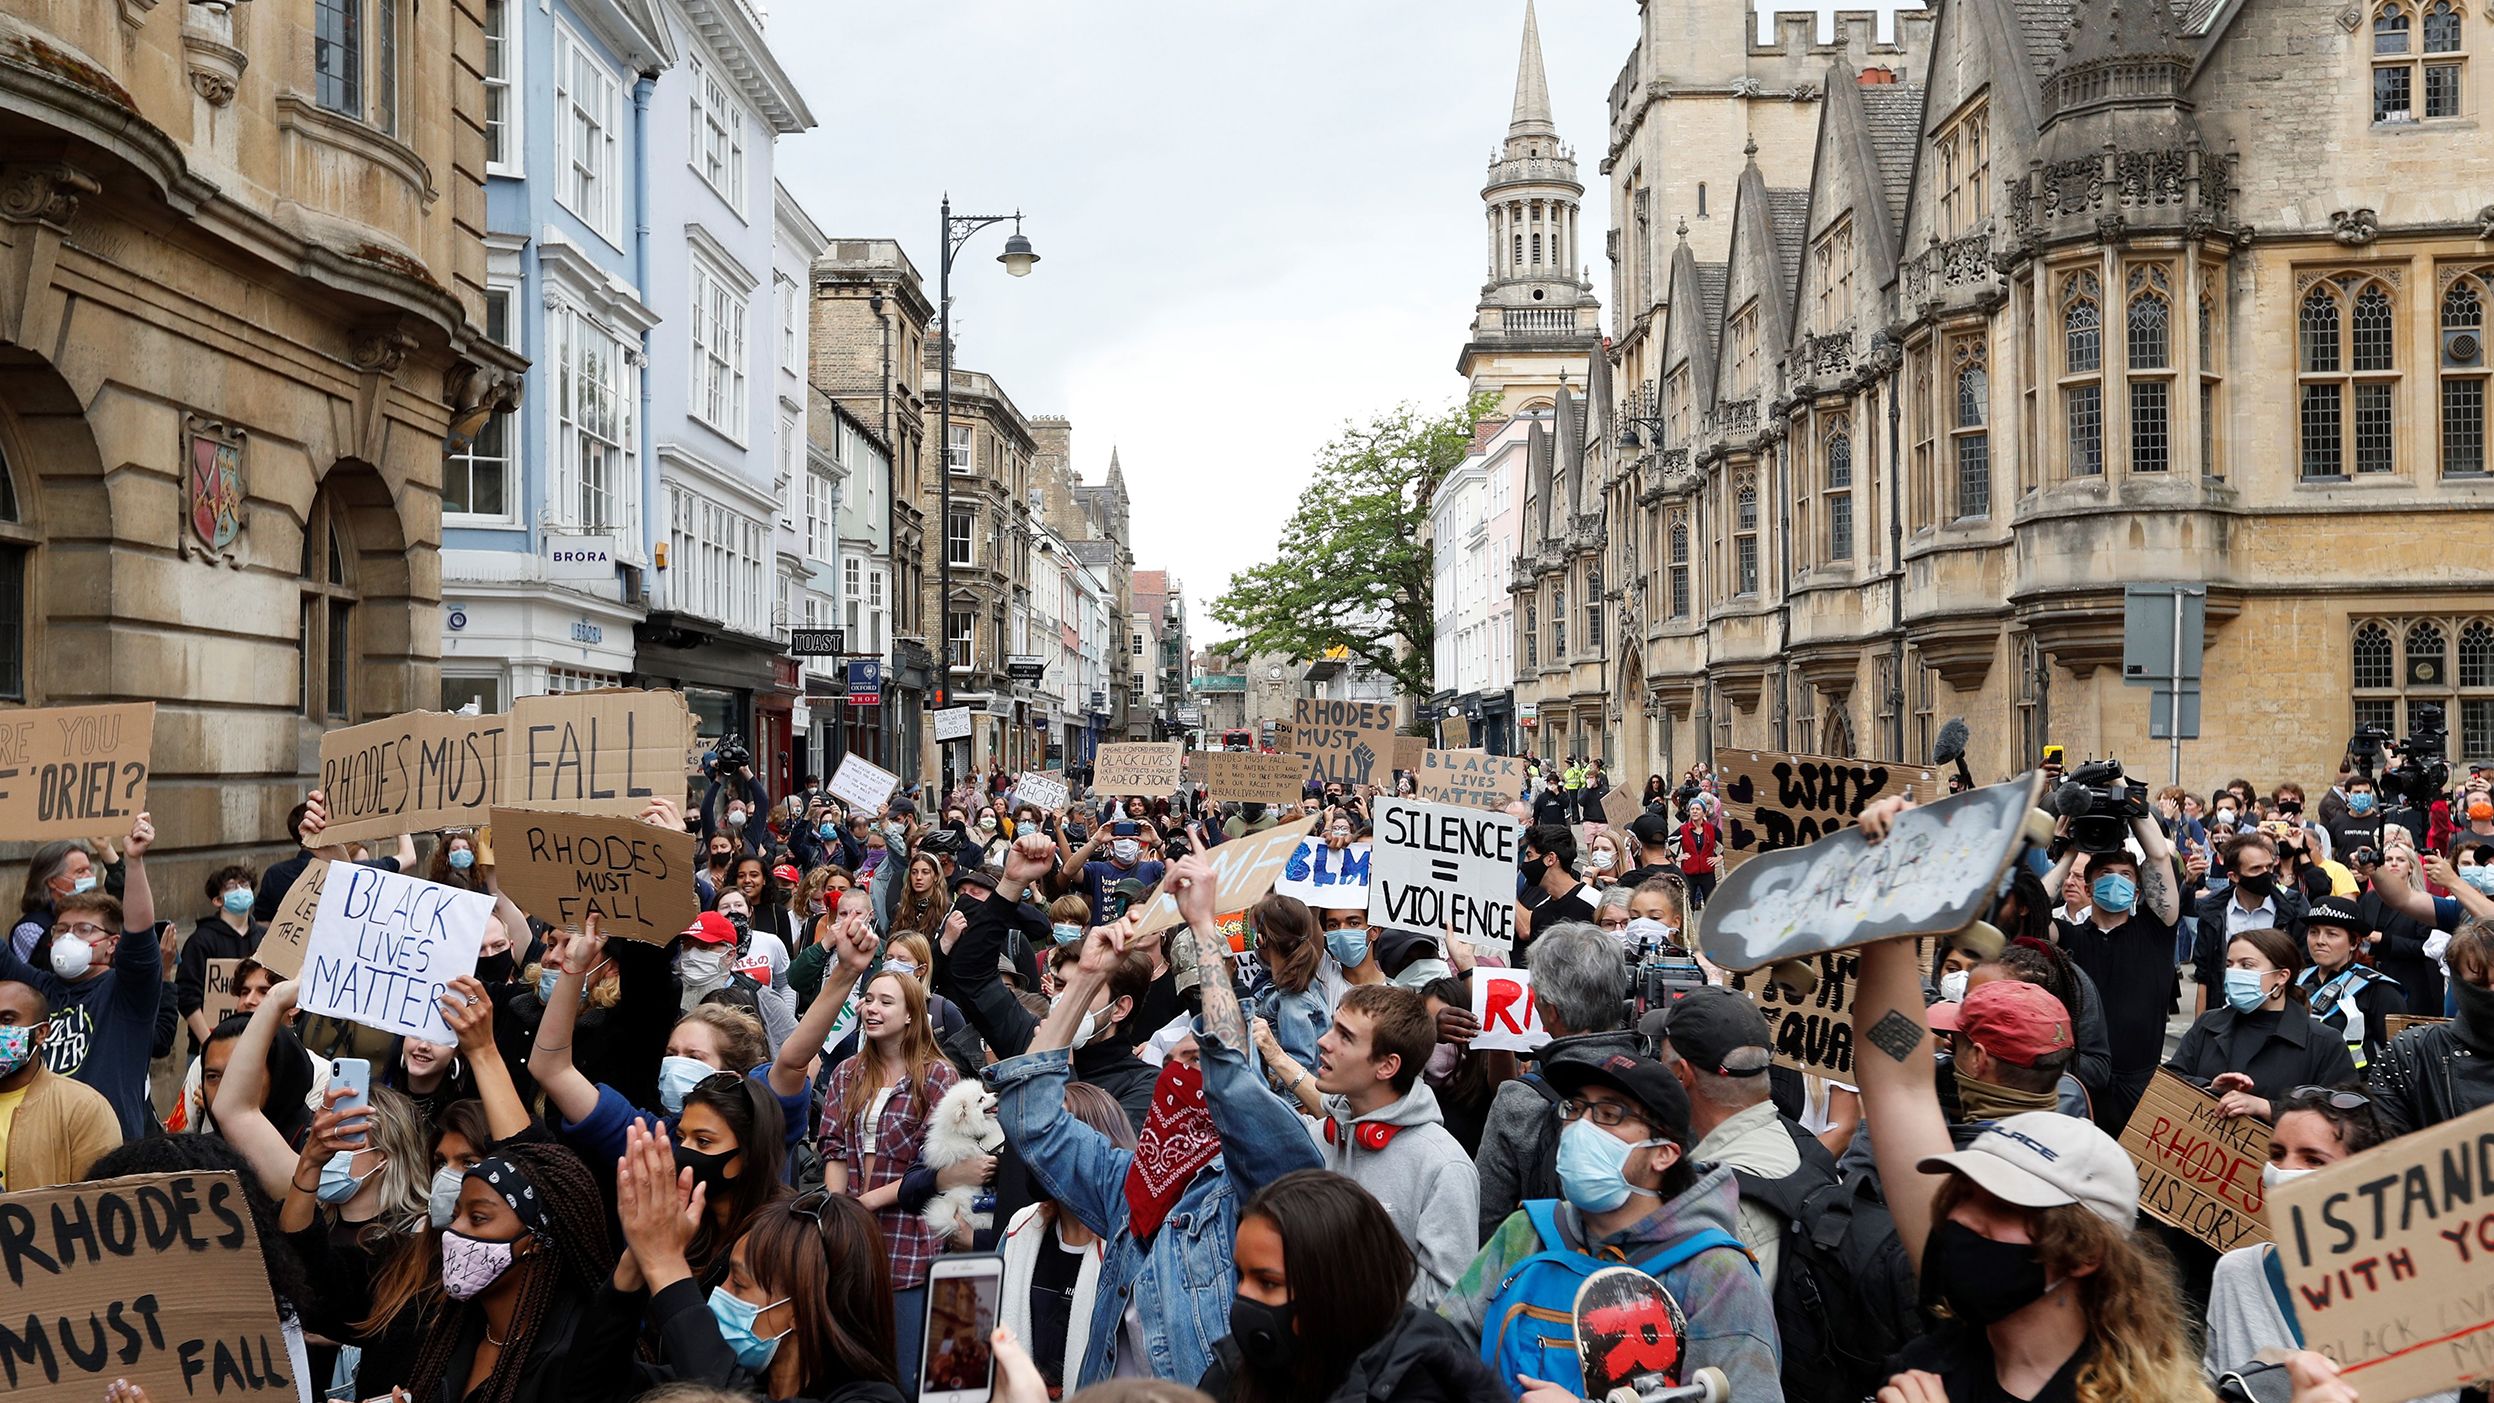 Protestors hold placards and shout slogans during during a protest called by the Rhodes Must Fall campaign calling for the removal of the statue of Cecil John Rhodes outside Oriel Cllege, at the University of Oxford on June 9, 2020.